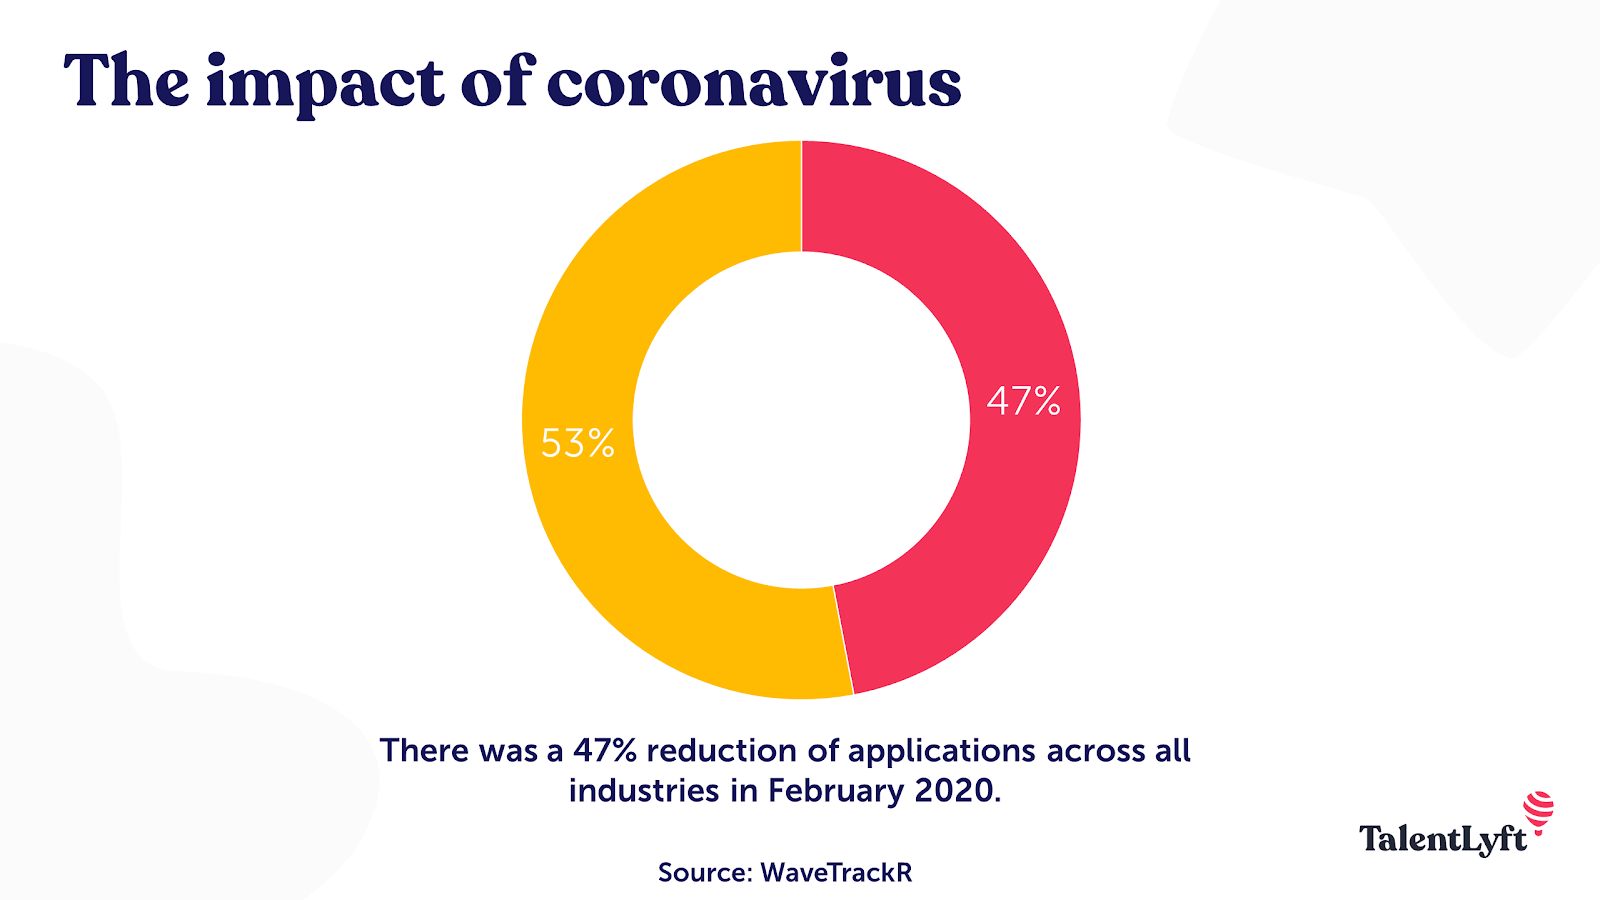 The impact of COVID-19 on recruitment